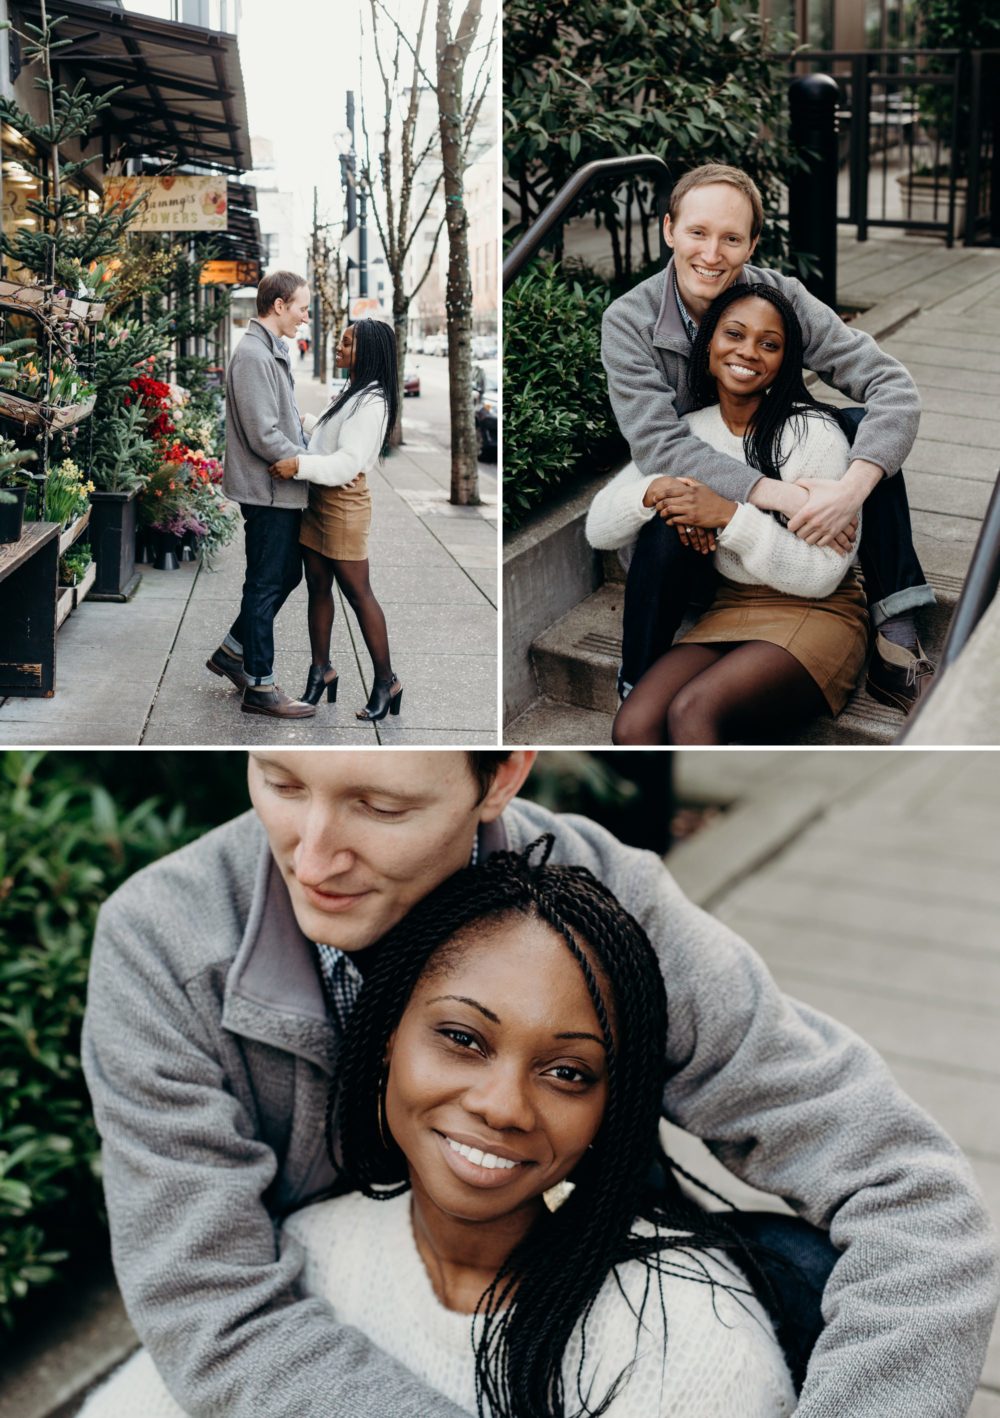 A cute young couple poses for portraits in urban Portland, Oregon.